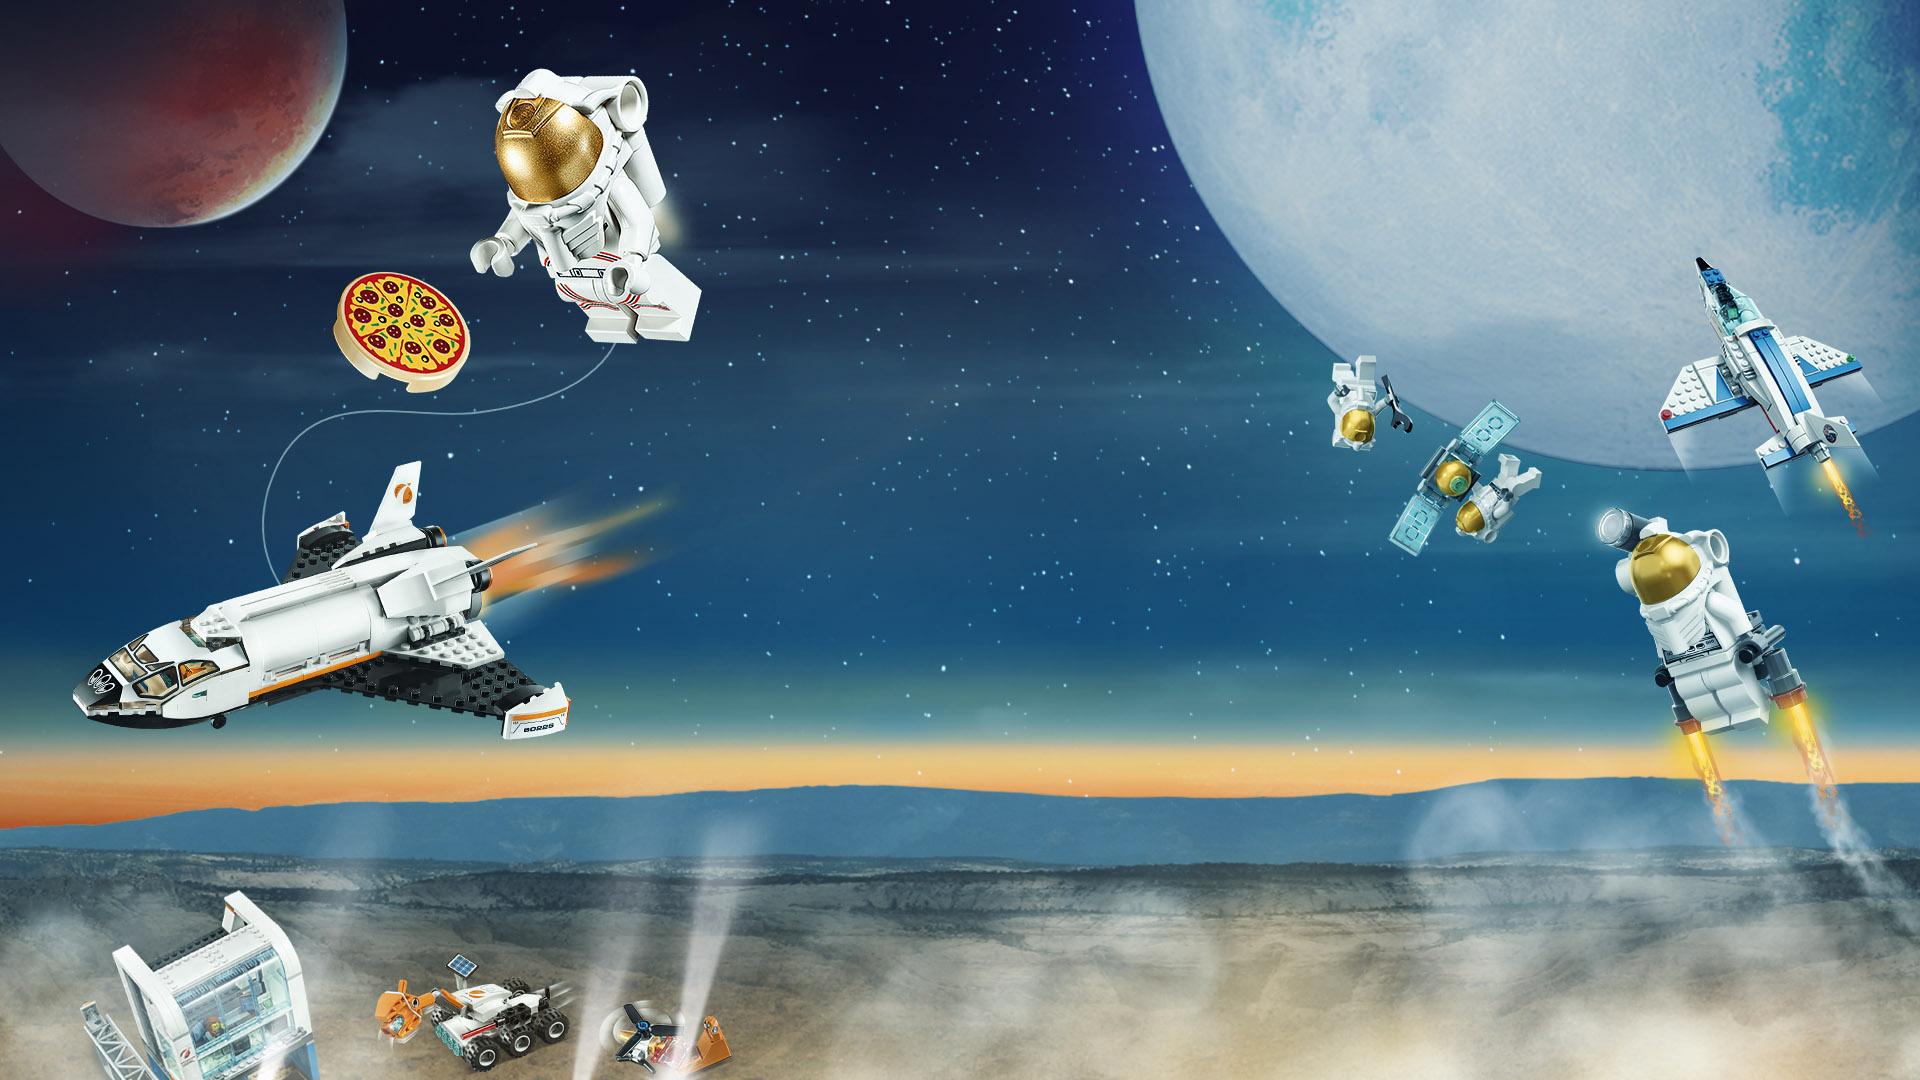 Lego Space - Space with planets and Lego